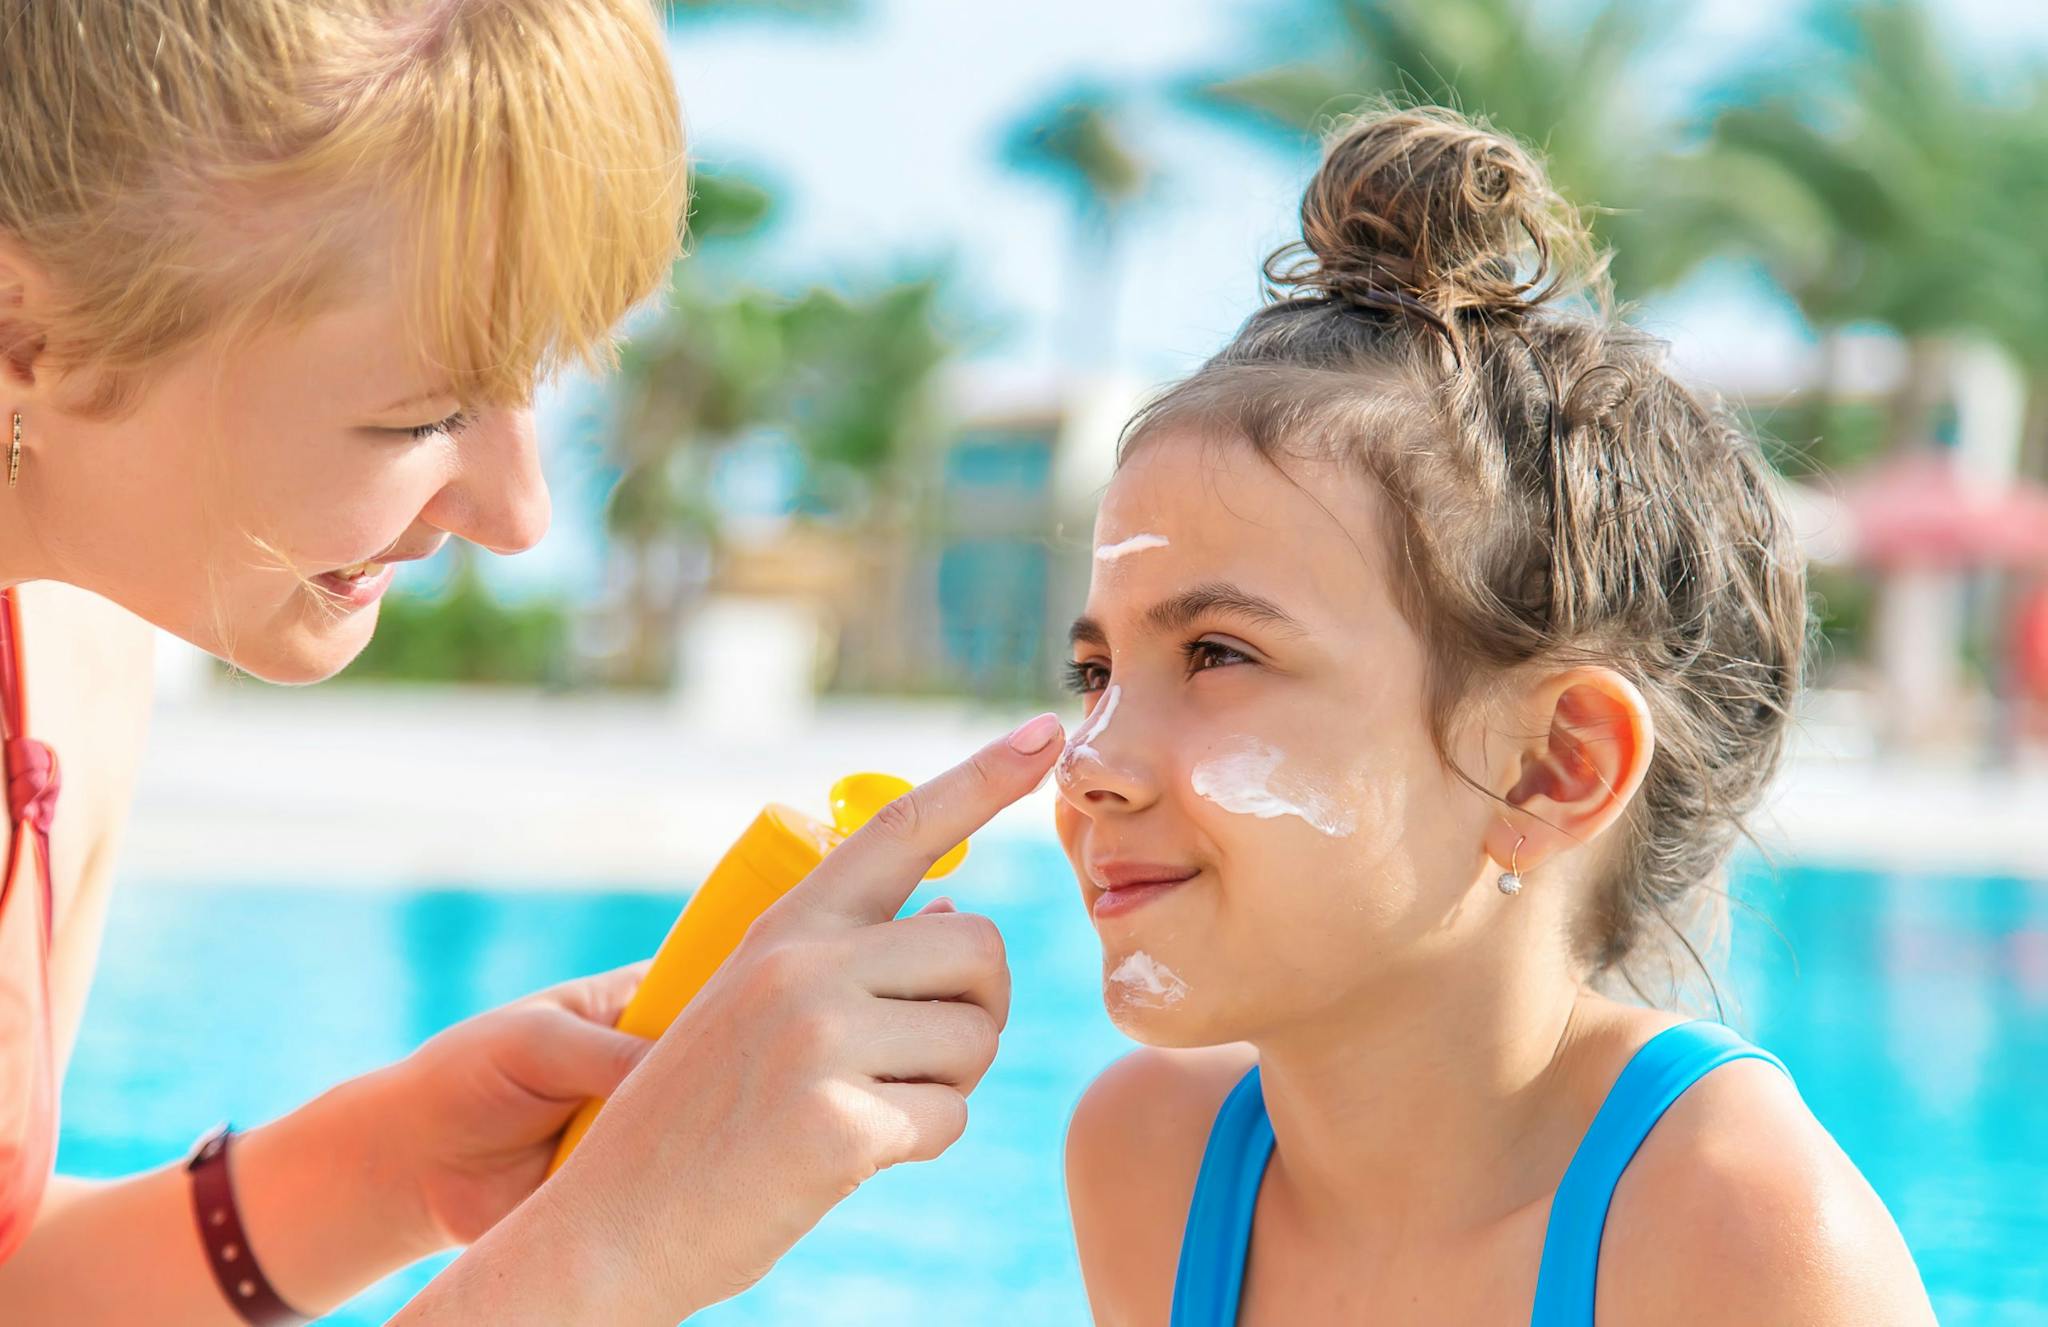 Learn how to keep safe in the sun this summer.